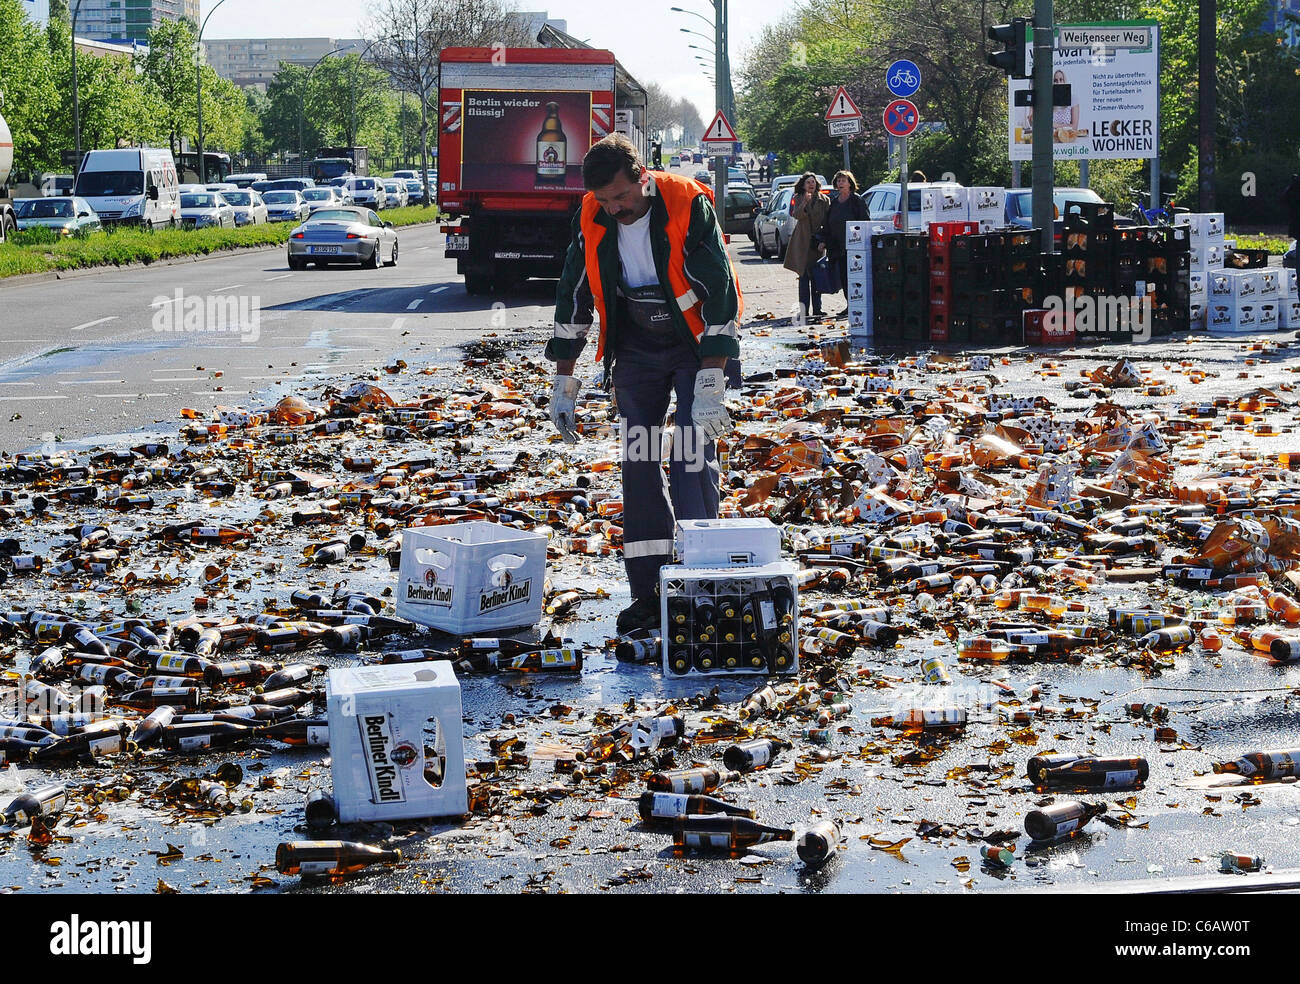 A Schultheiss beer truck lost 50 cases of beer at an intersection in Berlin-Lichtenberg. According to fire fighters who cleaned Stock Photo